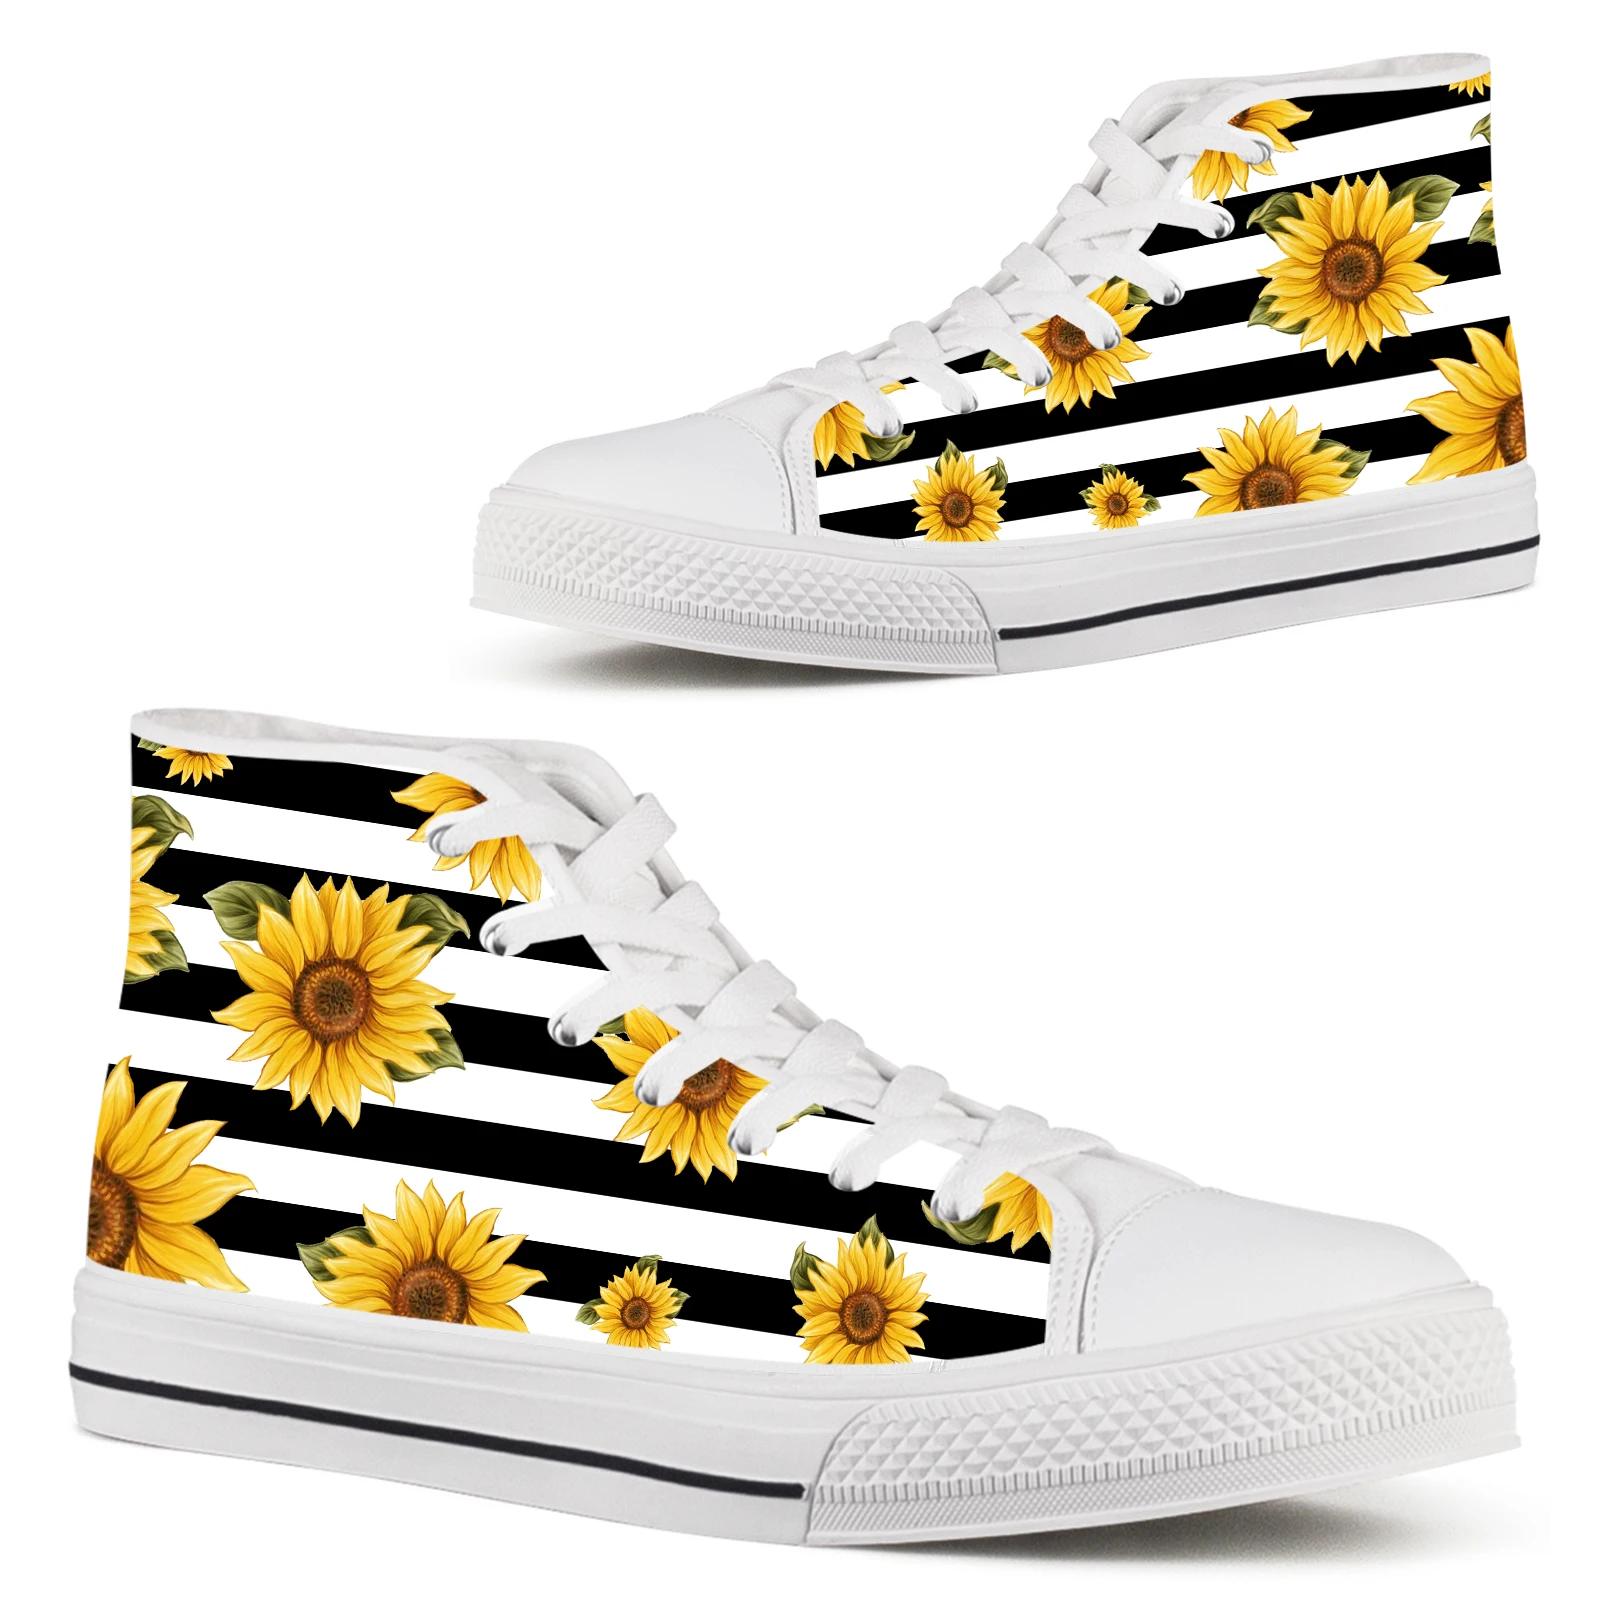 

ELVISWORDS Shoes For Ladies Girls Black And White Striped Sunflower High Top Lace Up Classic Canvas Shoes White Soft Sole Shoes